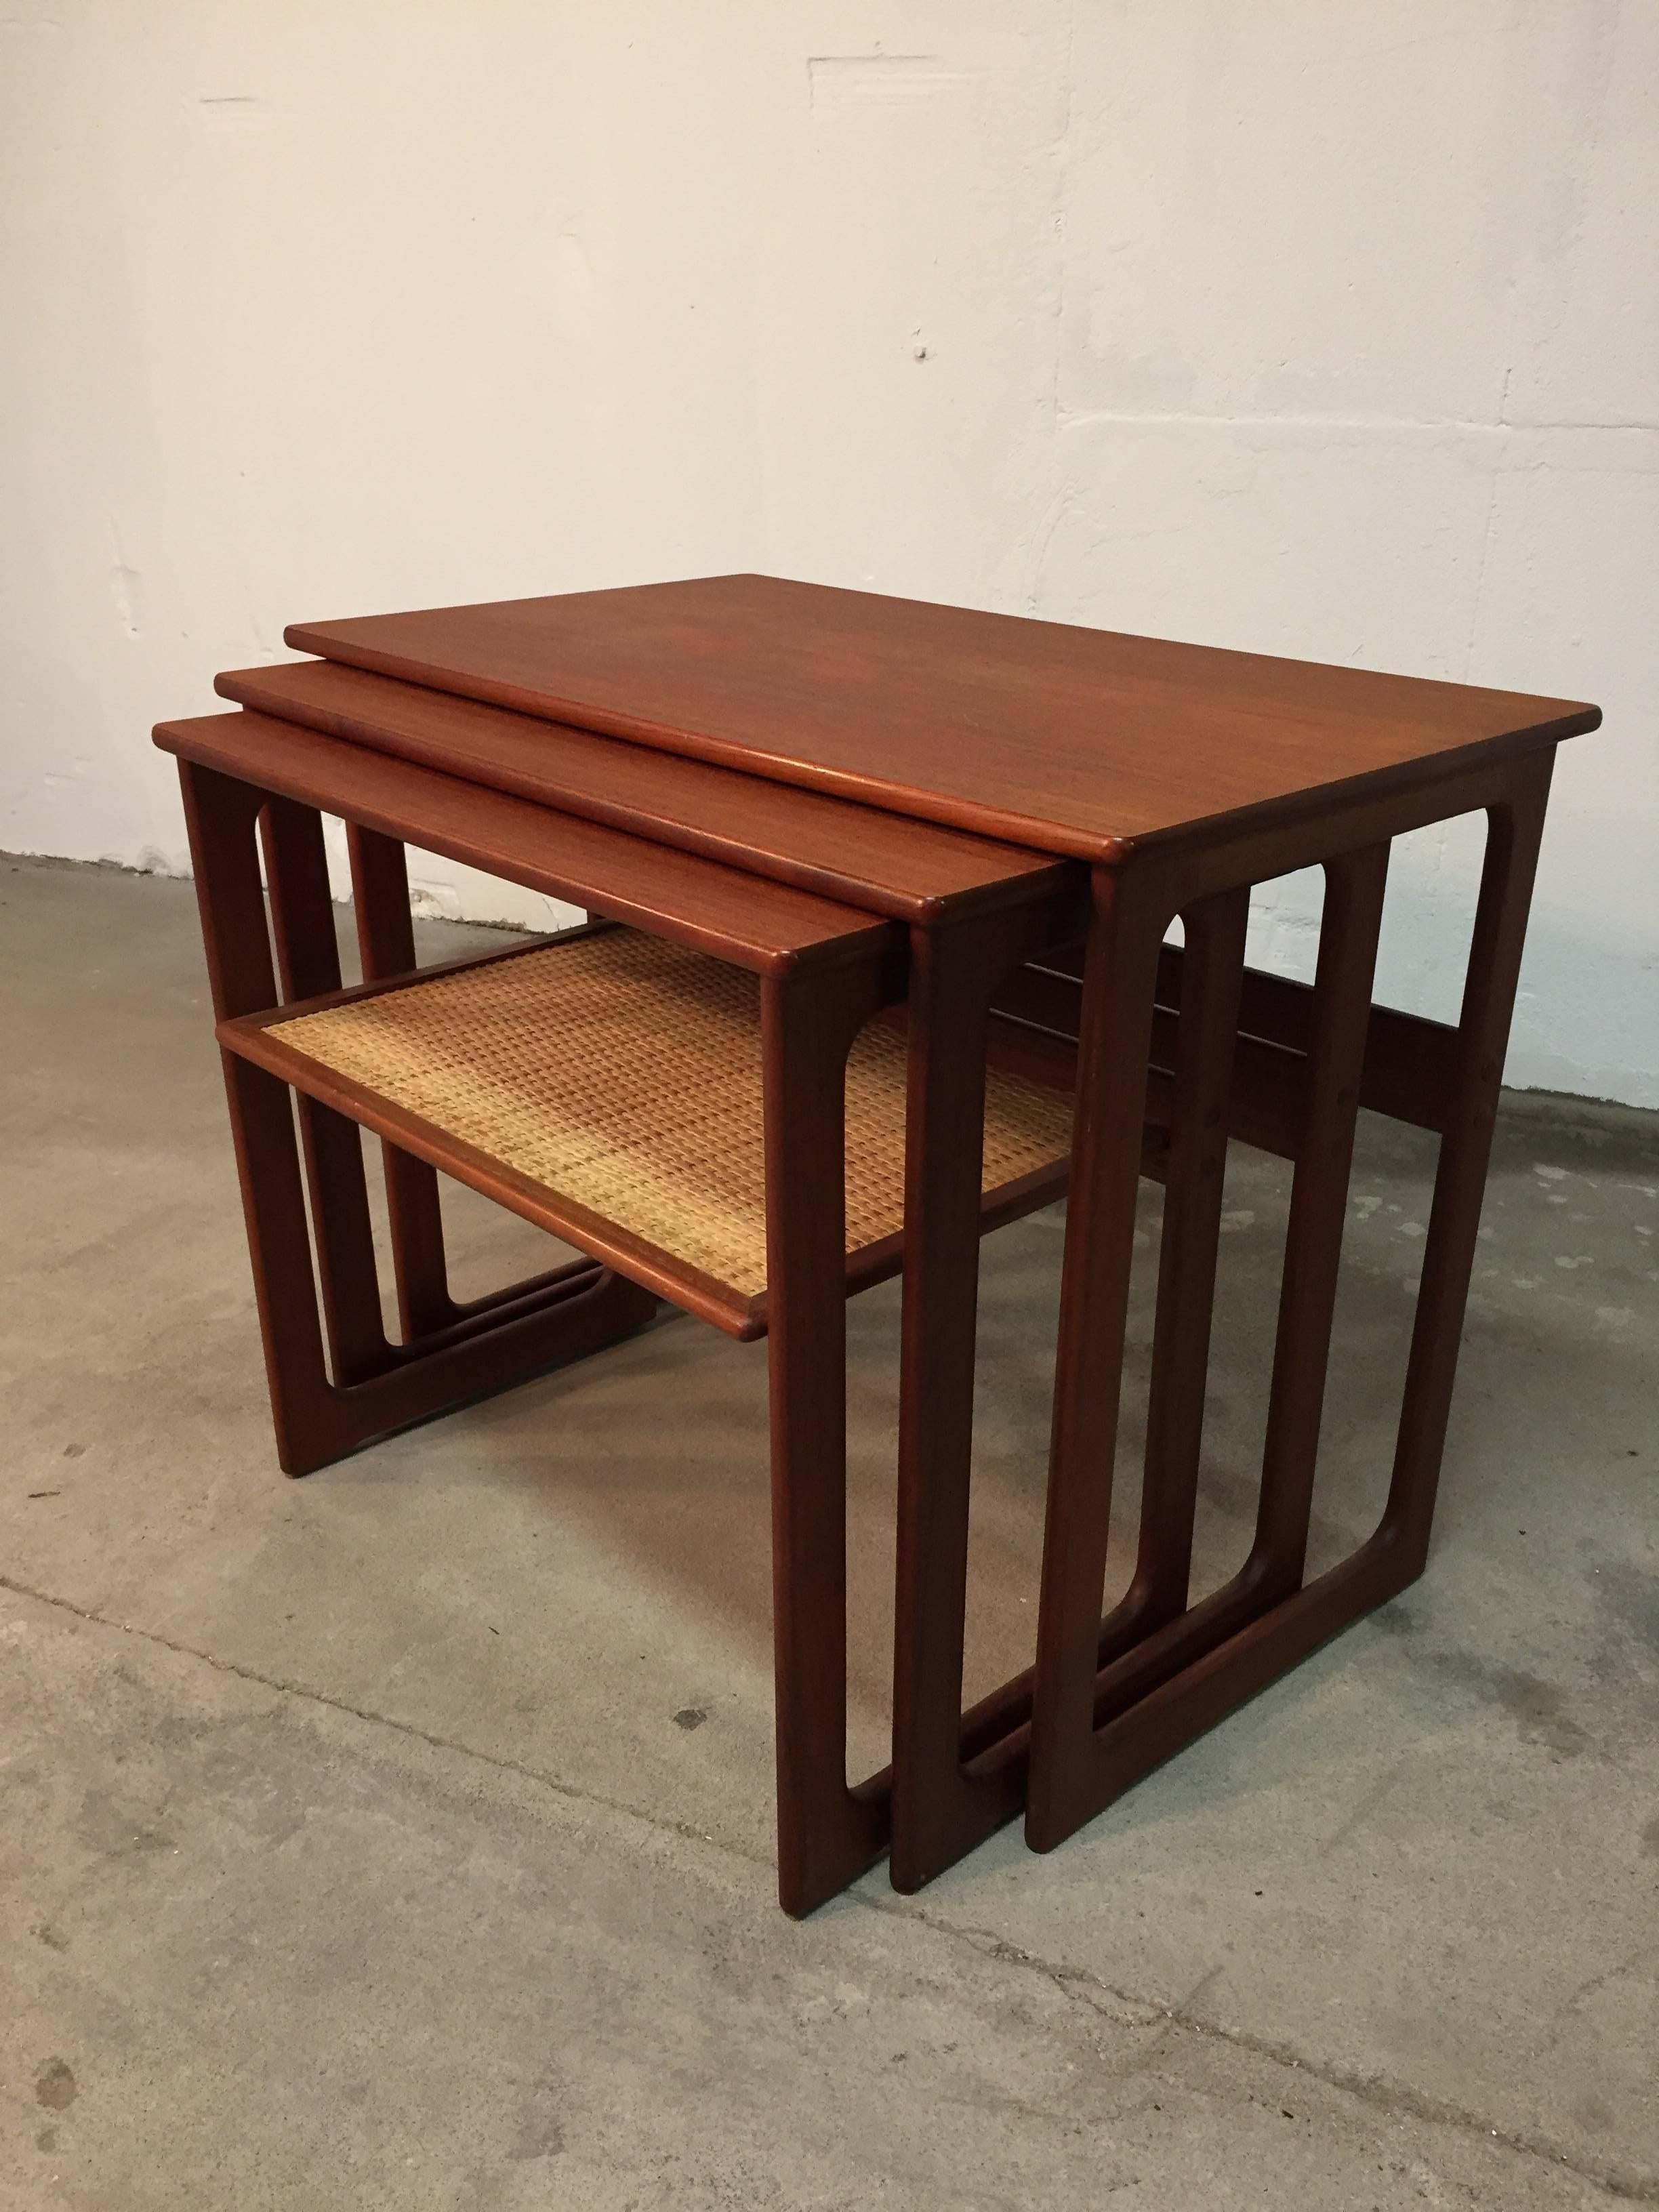 Danish Mid-Century set of three nesting tables in teak with cane shelves. 

Designed by Johannes Andersen and Illum Wikkelsø for manufacturer CFC Silkeborg. 

This tables are in very good condition, newly renovated and oiled. 

Dimensions:
H